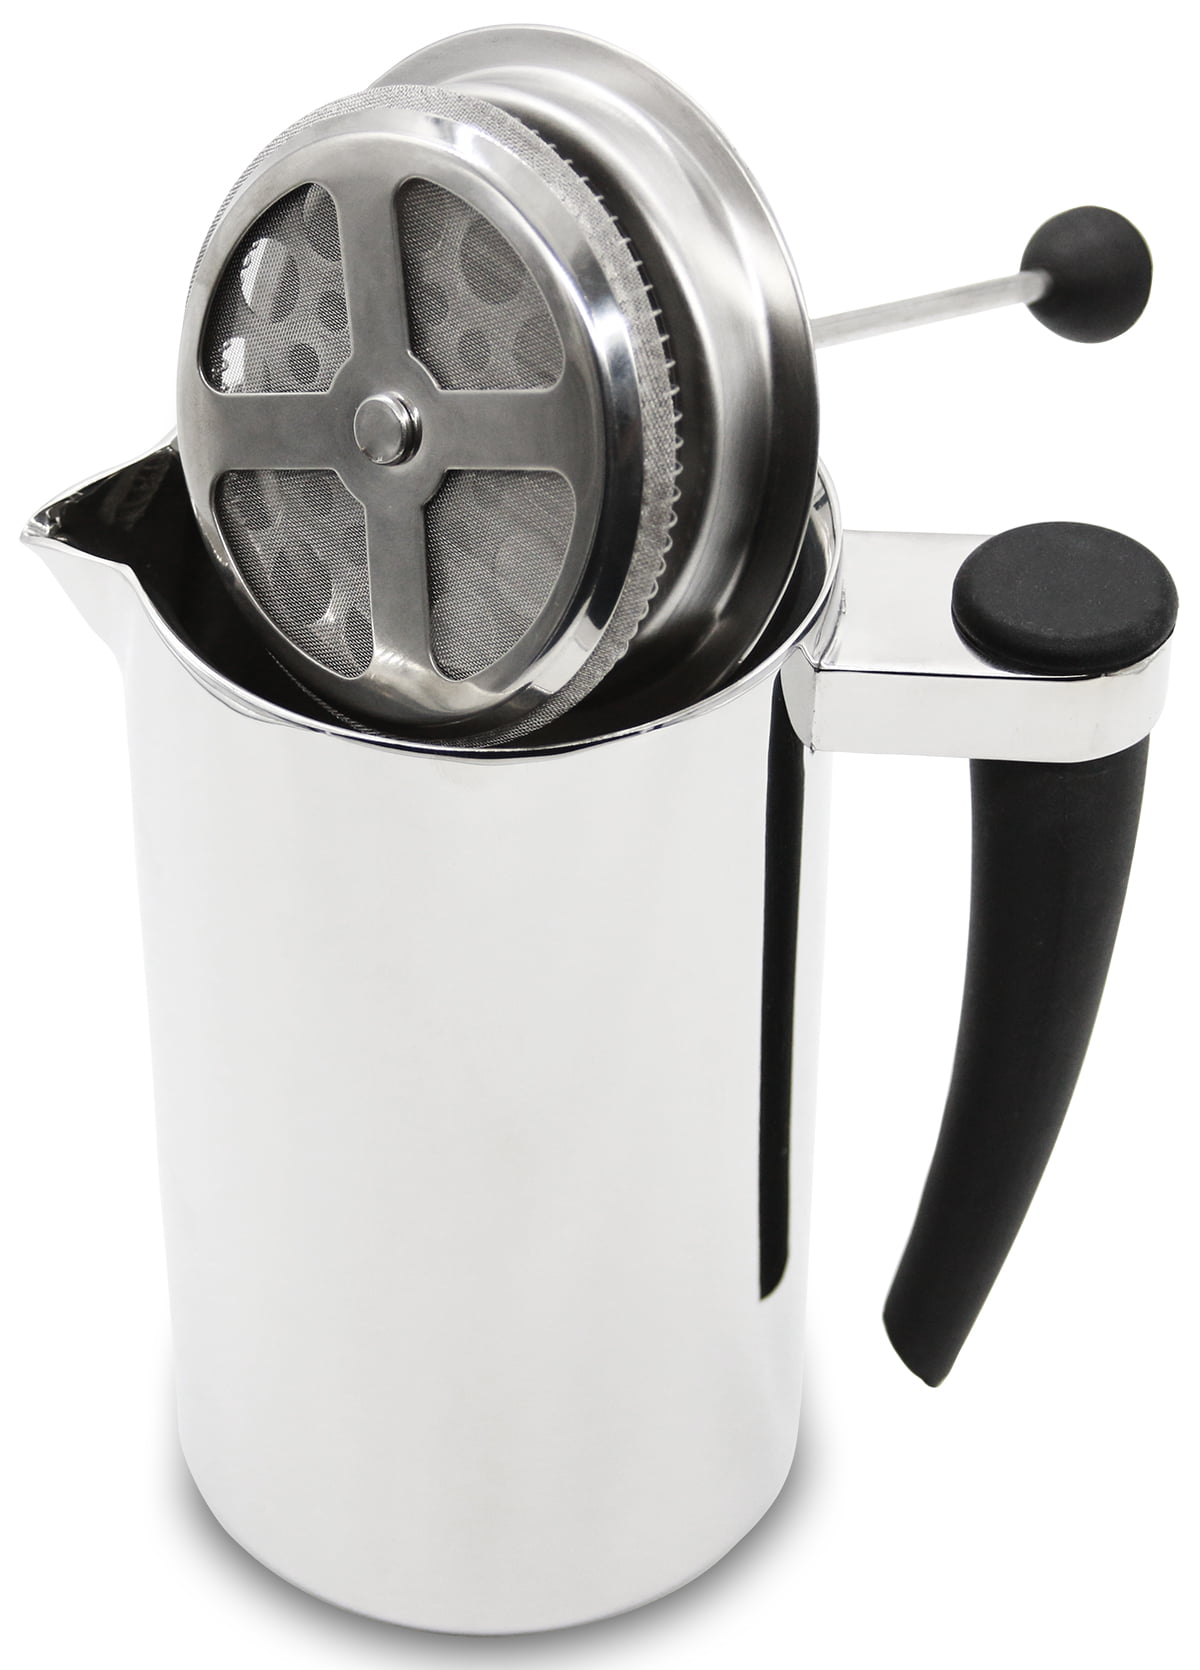 MIRA Stainless Steel French Press Coffee Maker Mira Brands CDP-301-Cascade 350 ml Keeps Brewed Coffee or Tea Hot Double Walled Insulated Coffee /& Tea Brewer Pot /& Maker 12 Oz